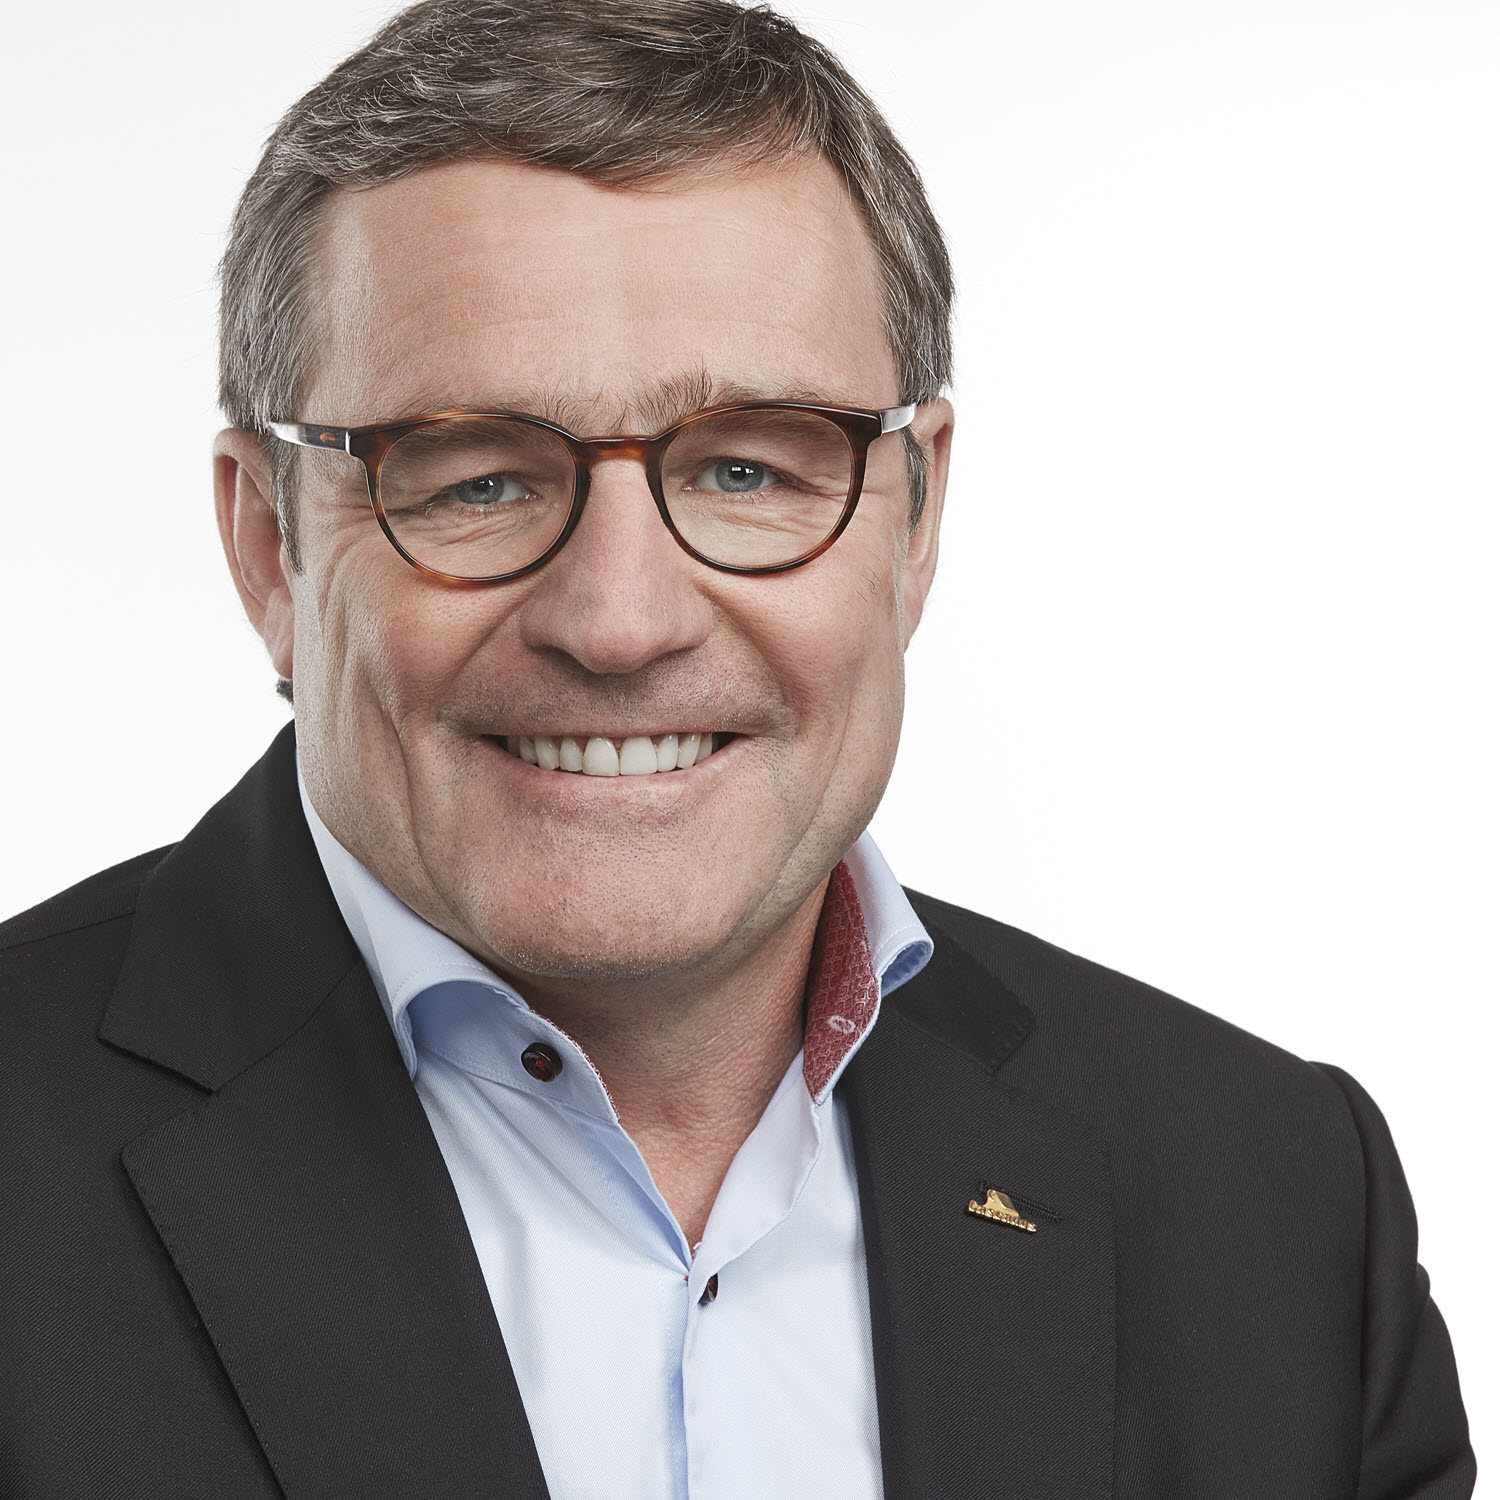 Mario Plourde - President and Chief Executive Officer